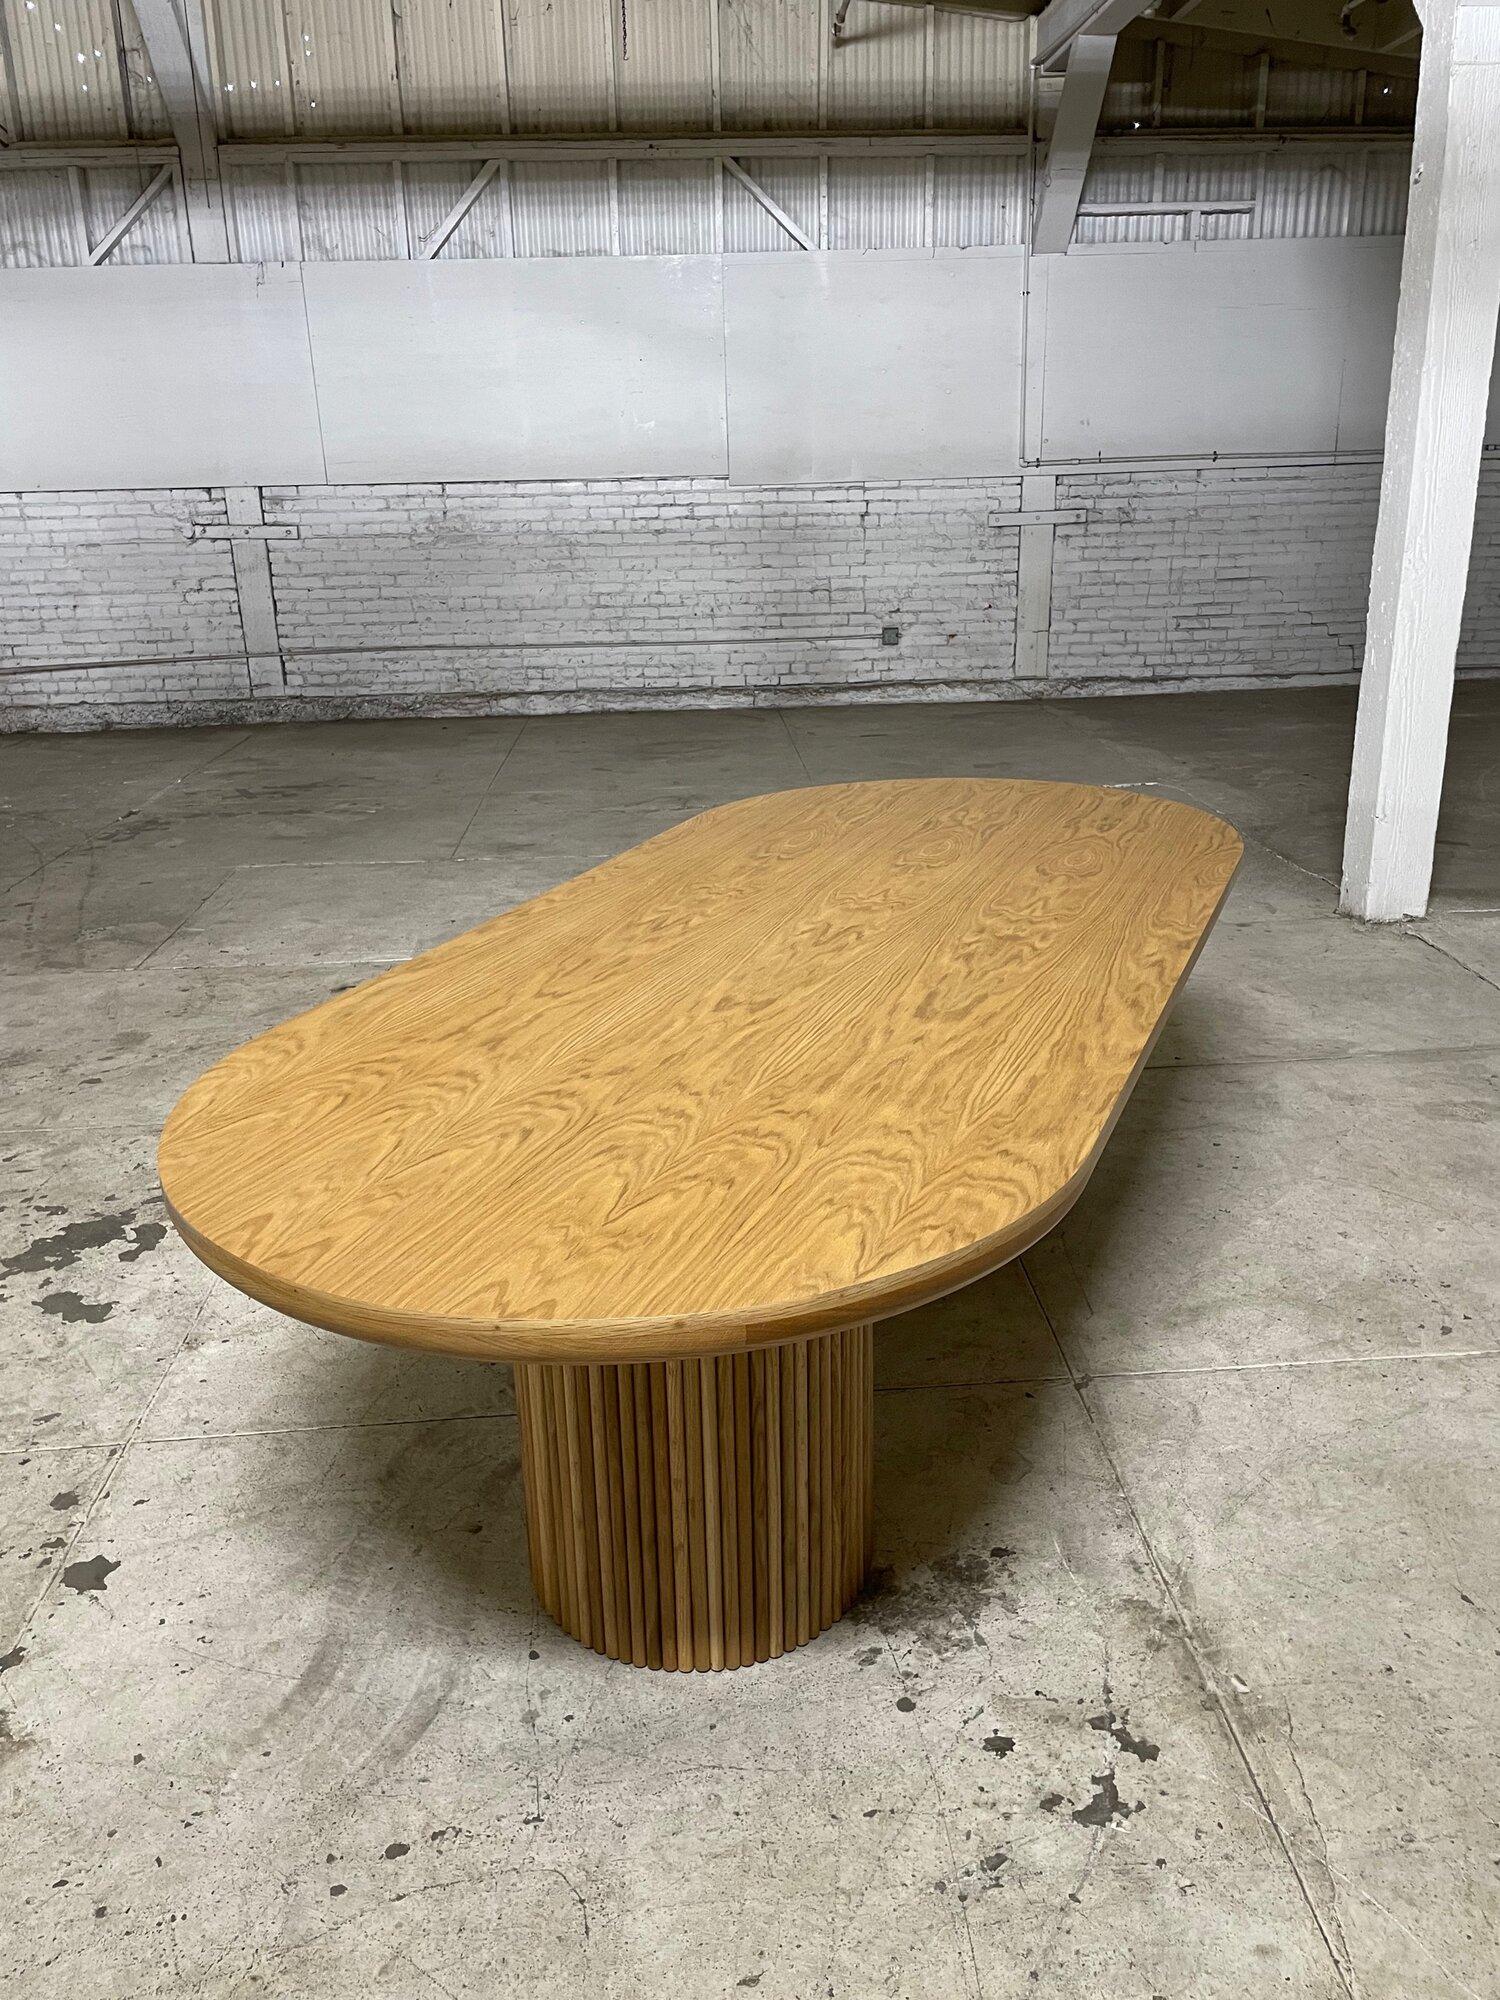 Knee Clearance 28.5
Fully custom made rift white oak dining table with a race track table top that flows along the edge. The grain along the top is spectacular, since these are organic cuts of wood and each table is made upon order the grain